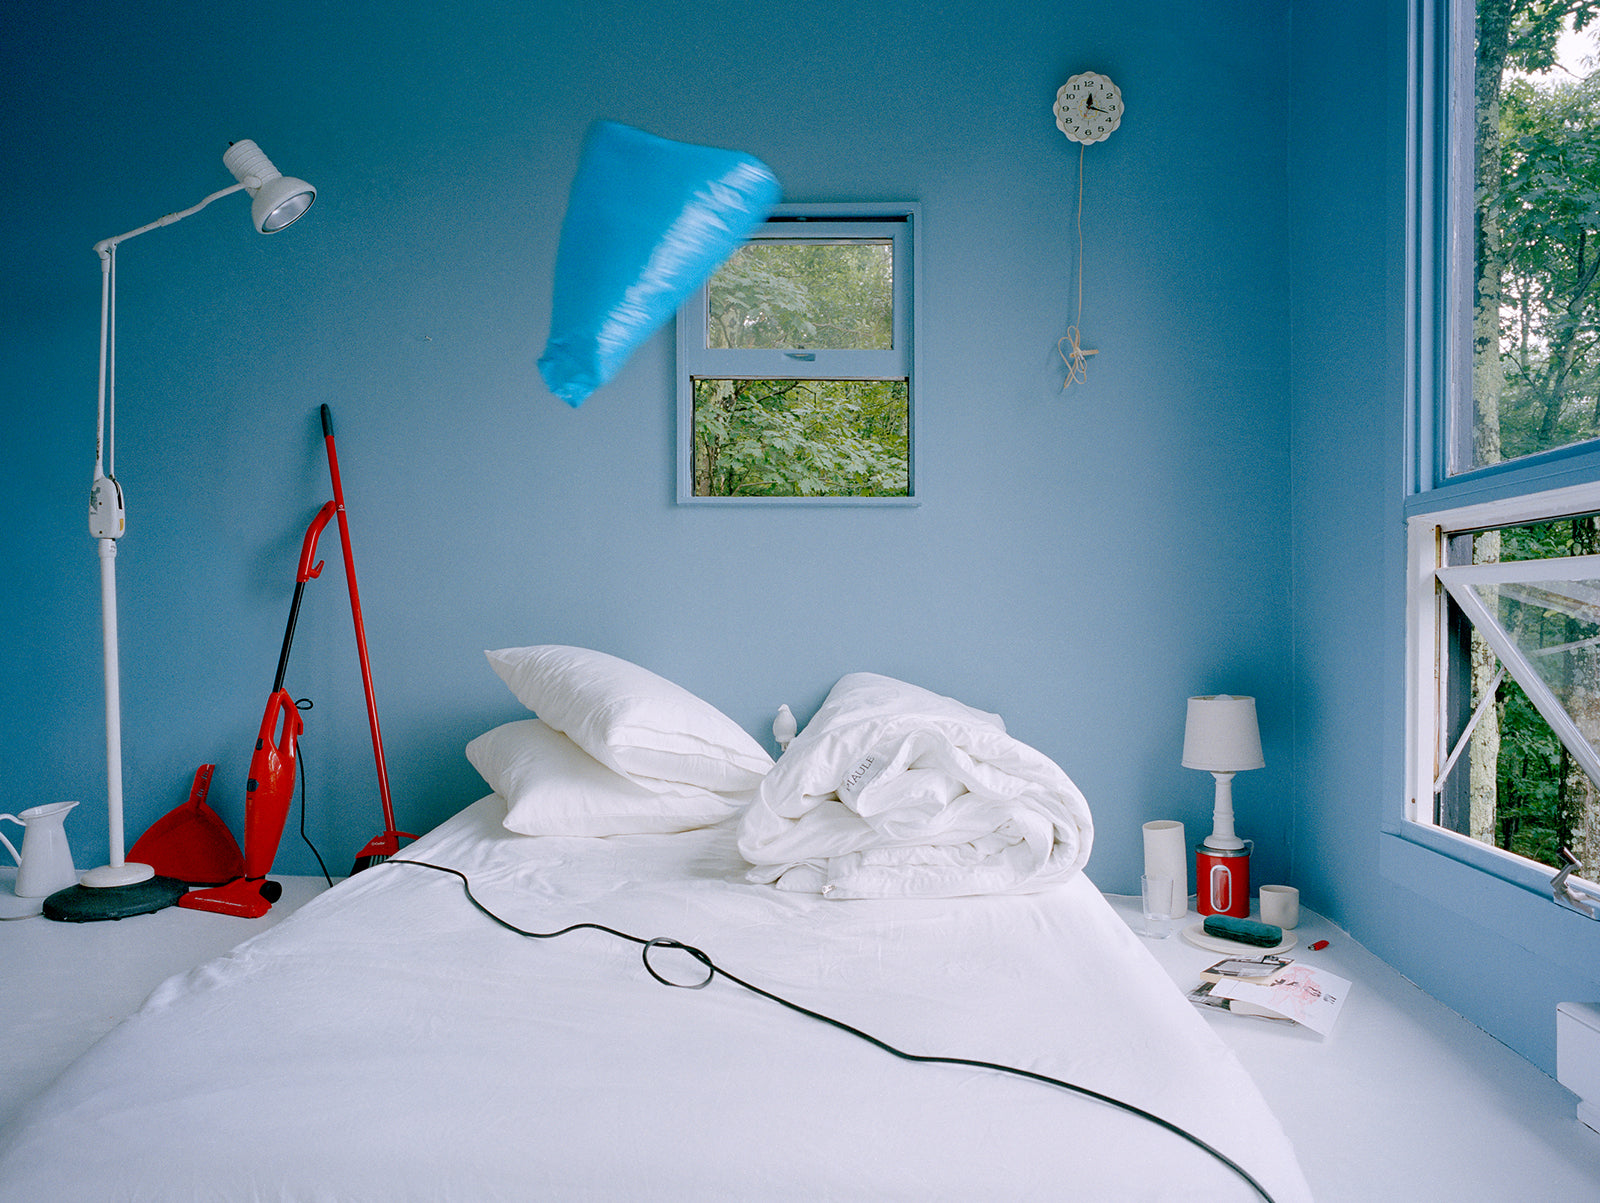  weird bedroom scene with vacuum cord across white bedding and blue bag flying through the air